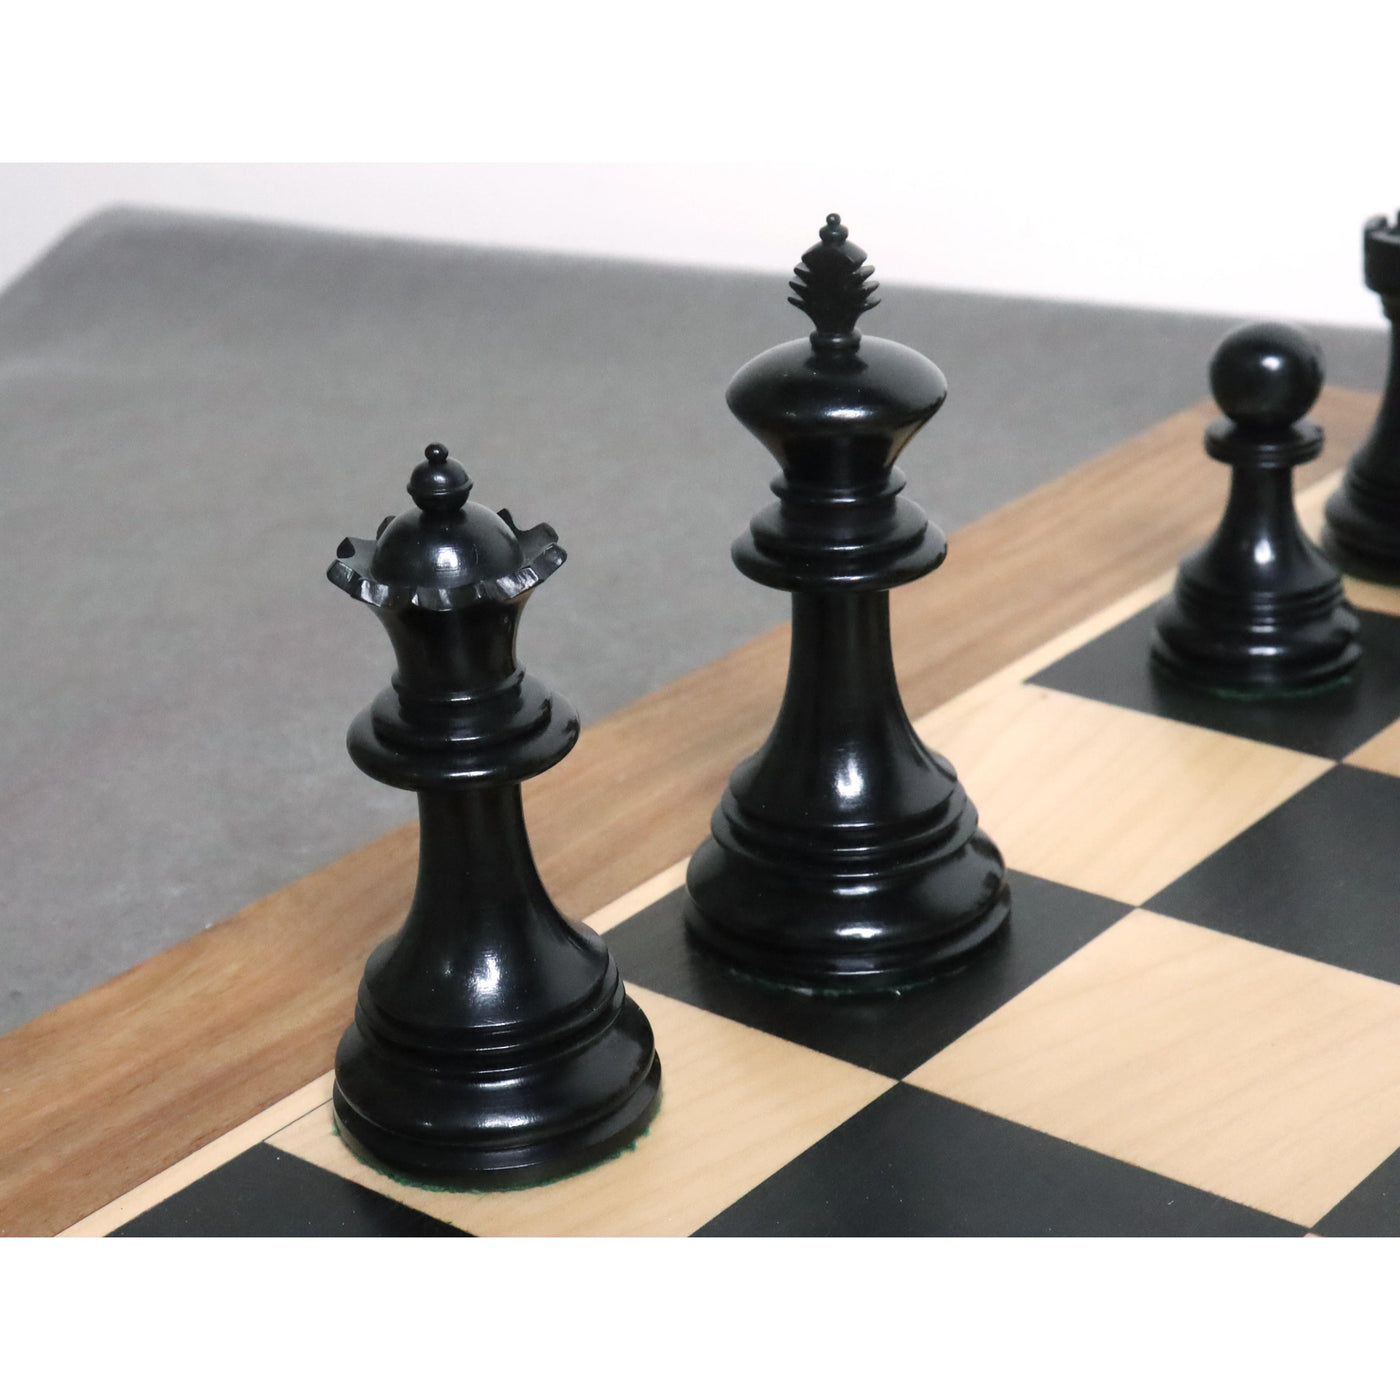 4.2" Luxury Augustus Staunton Chess Set - Chess Pieces Only -Triple Weighted Ebony Wood